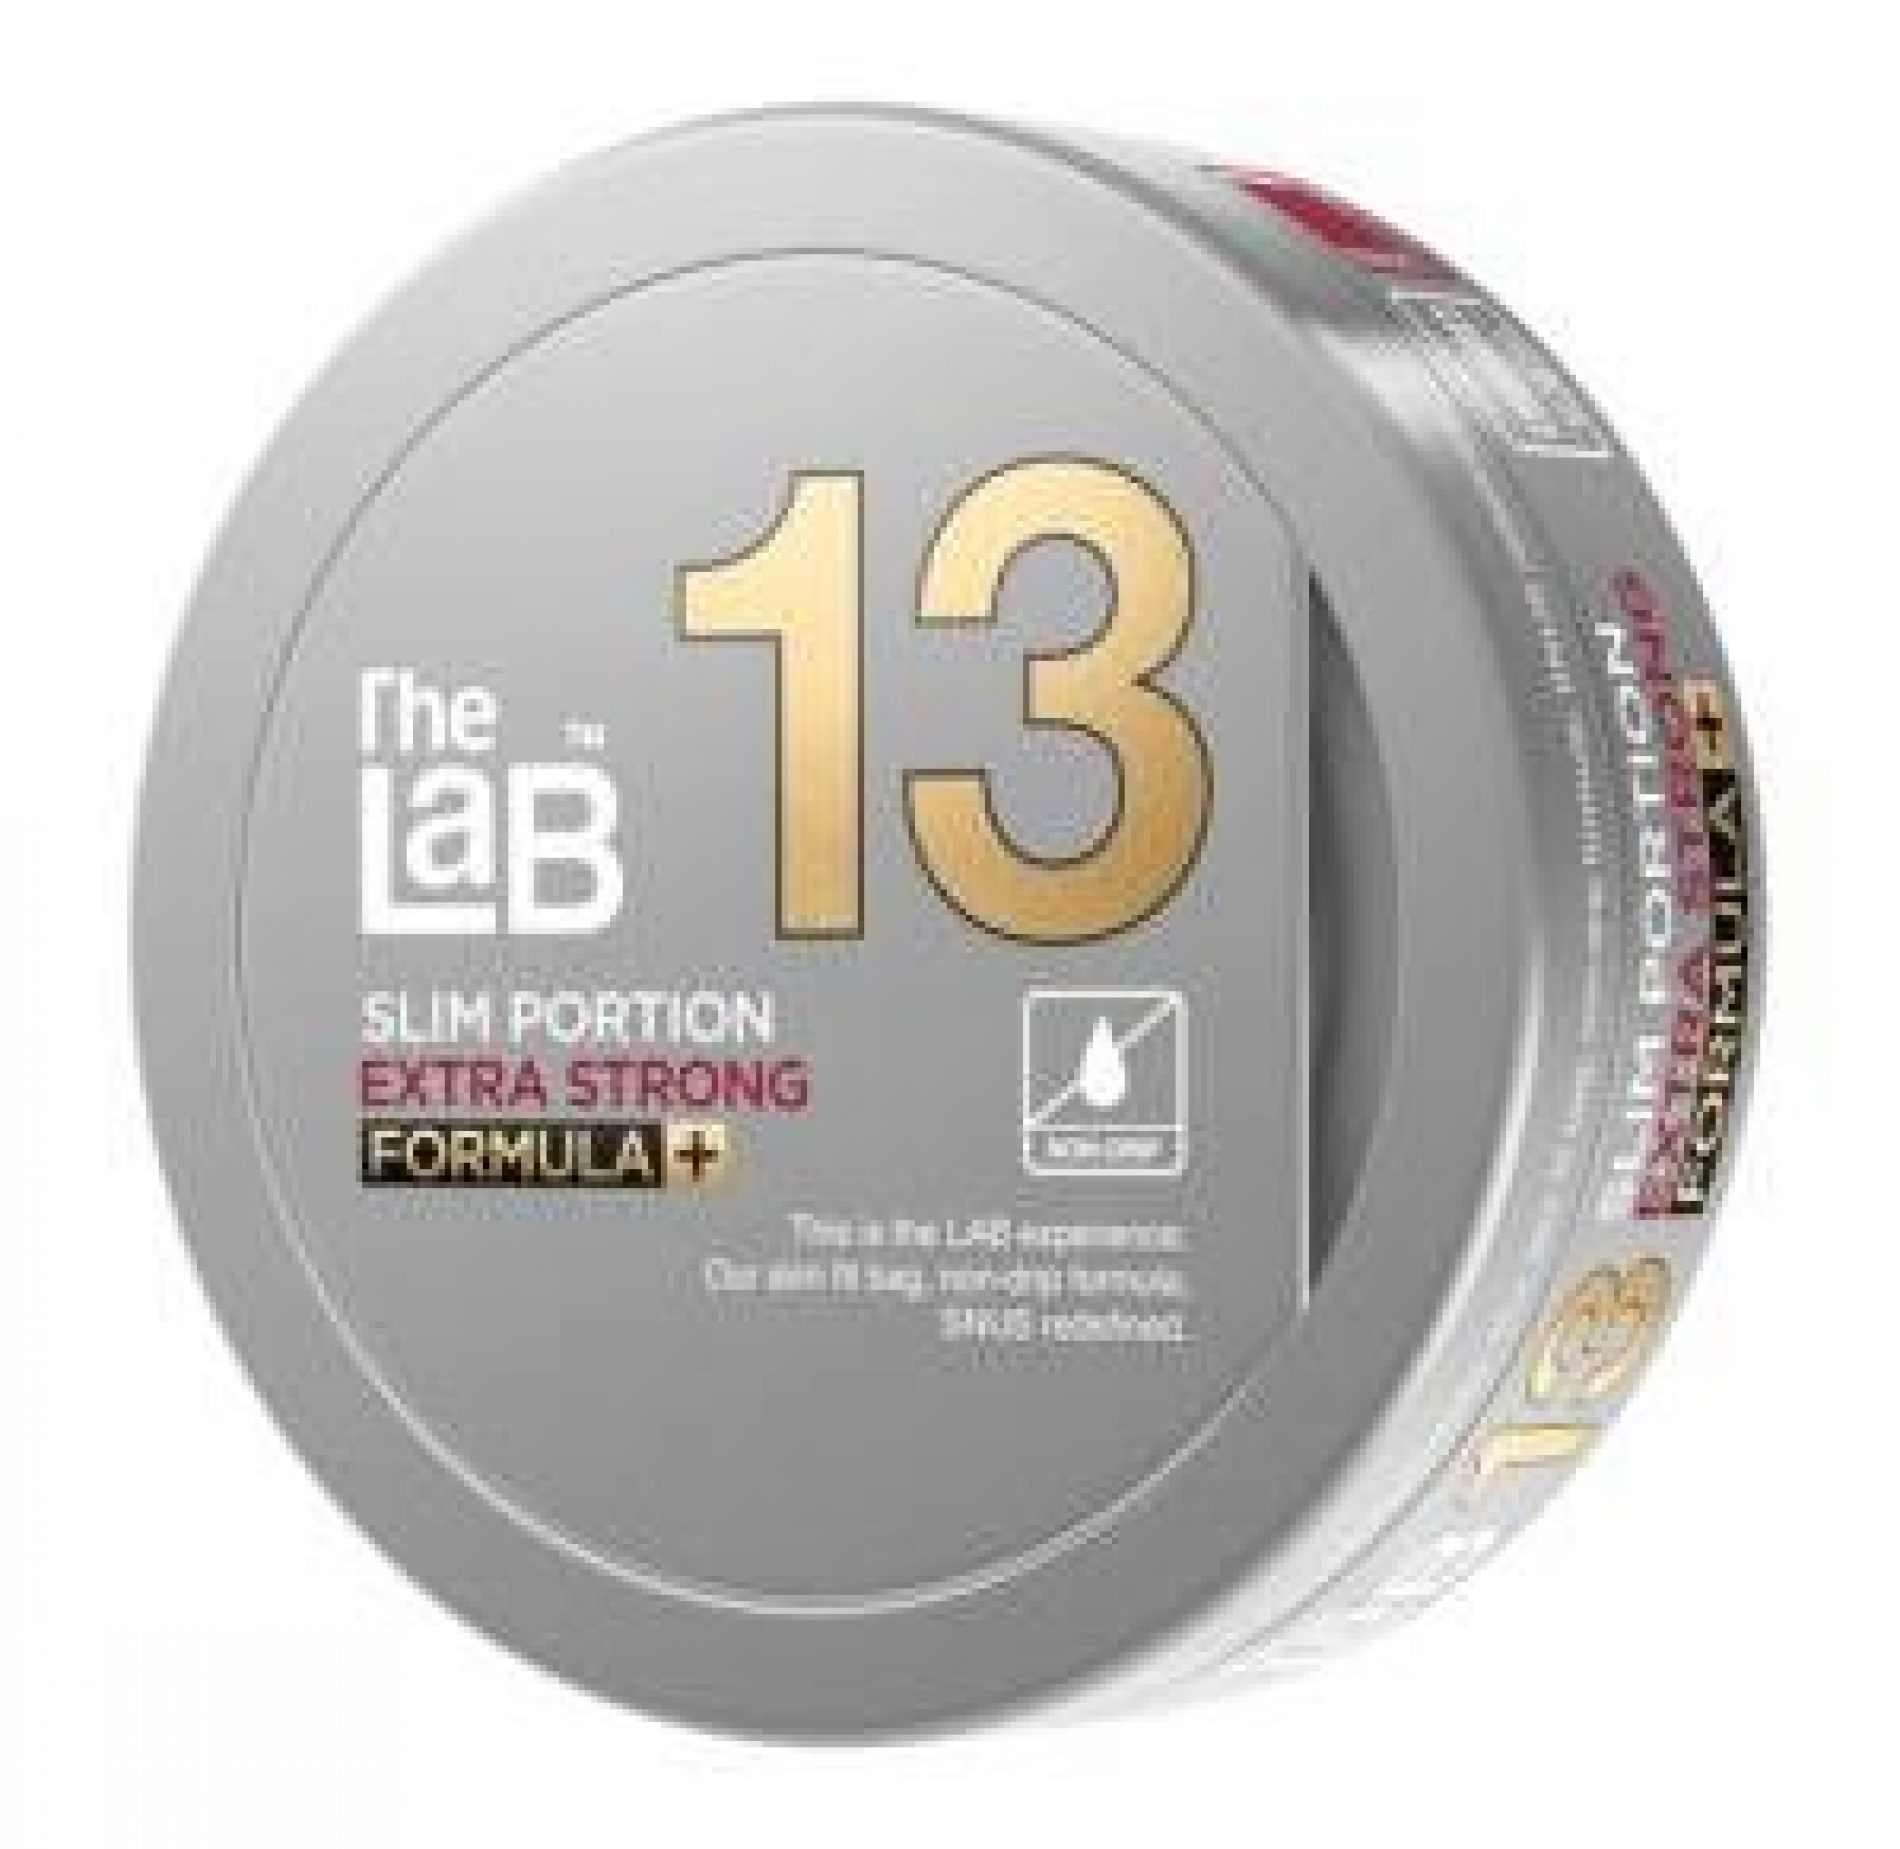 The Lab 13 Extra Strong Slim Portion Formula+ Snus released